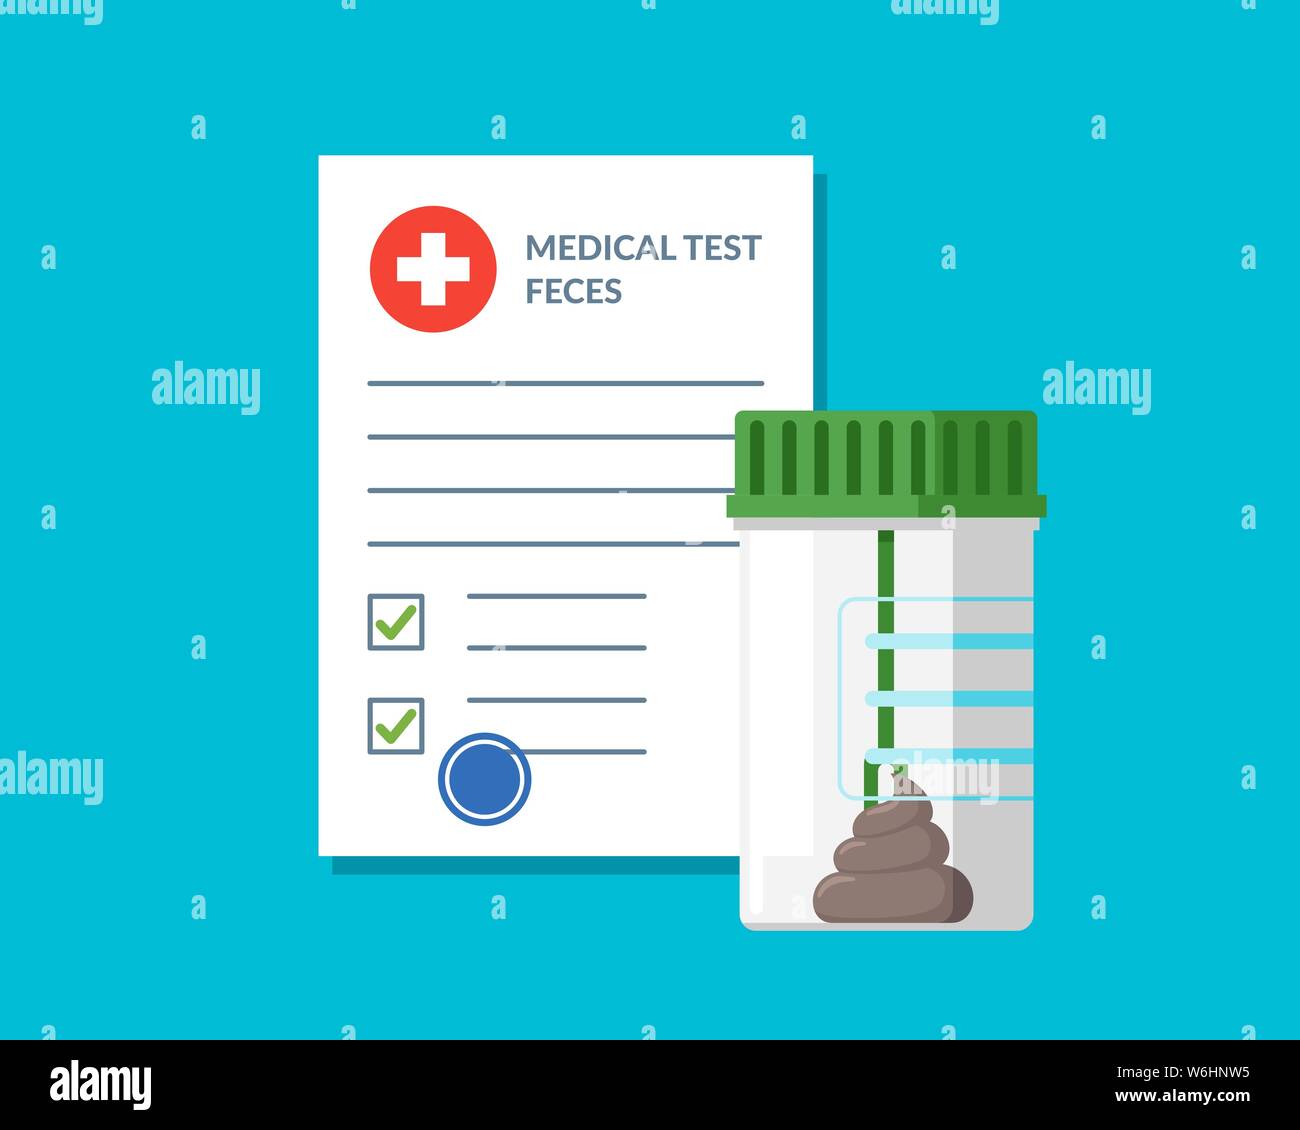 Plastic jar stool feces test analysis and medical form list with results data and approved check mark vector illustration. Flat clinical checklist document. Insurance or medicine examination concept Stock Vector